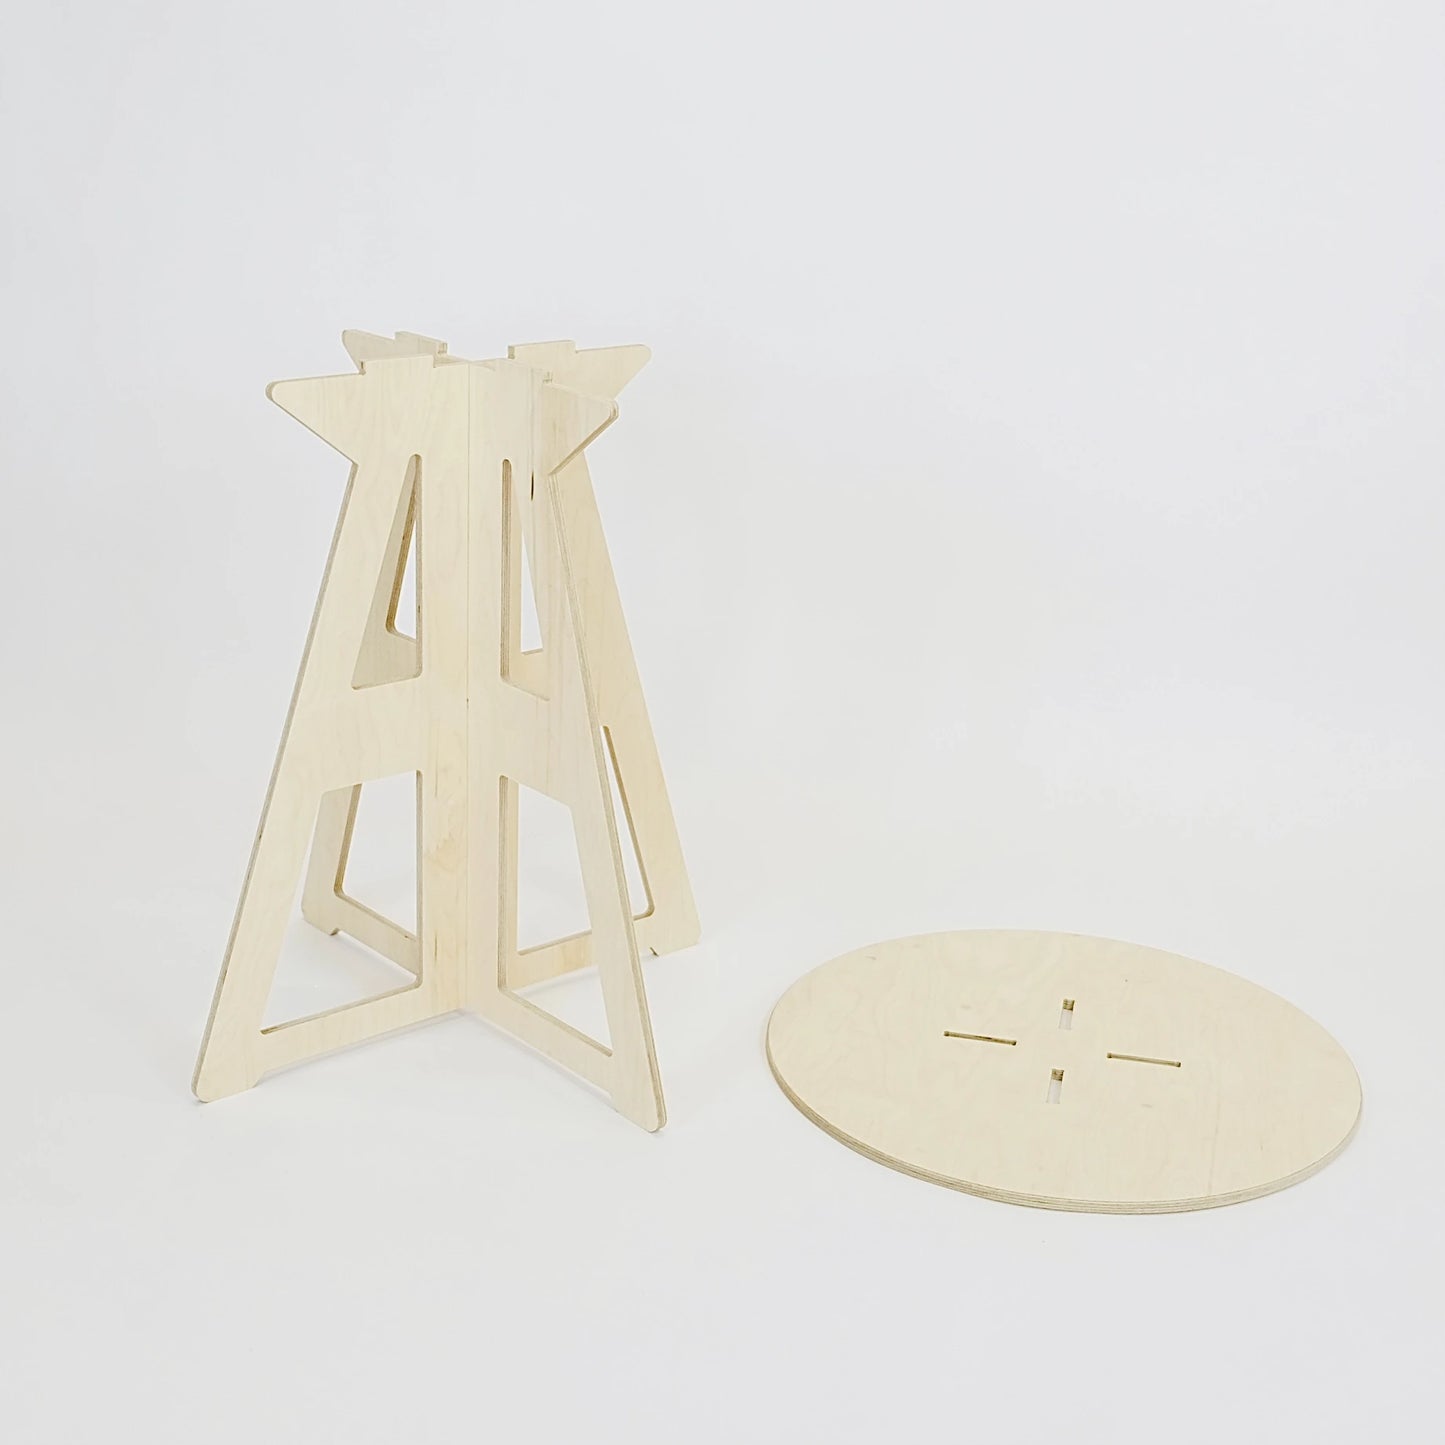 A simple modern pale wooden small table top and legs. It has a round top which lays on the floor, and triangle legs which have slotted together in a cross shape, the base is wider than the top. The top also features four grooves where the legs would slot into the top.